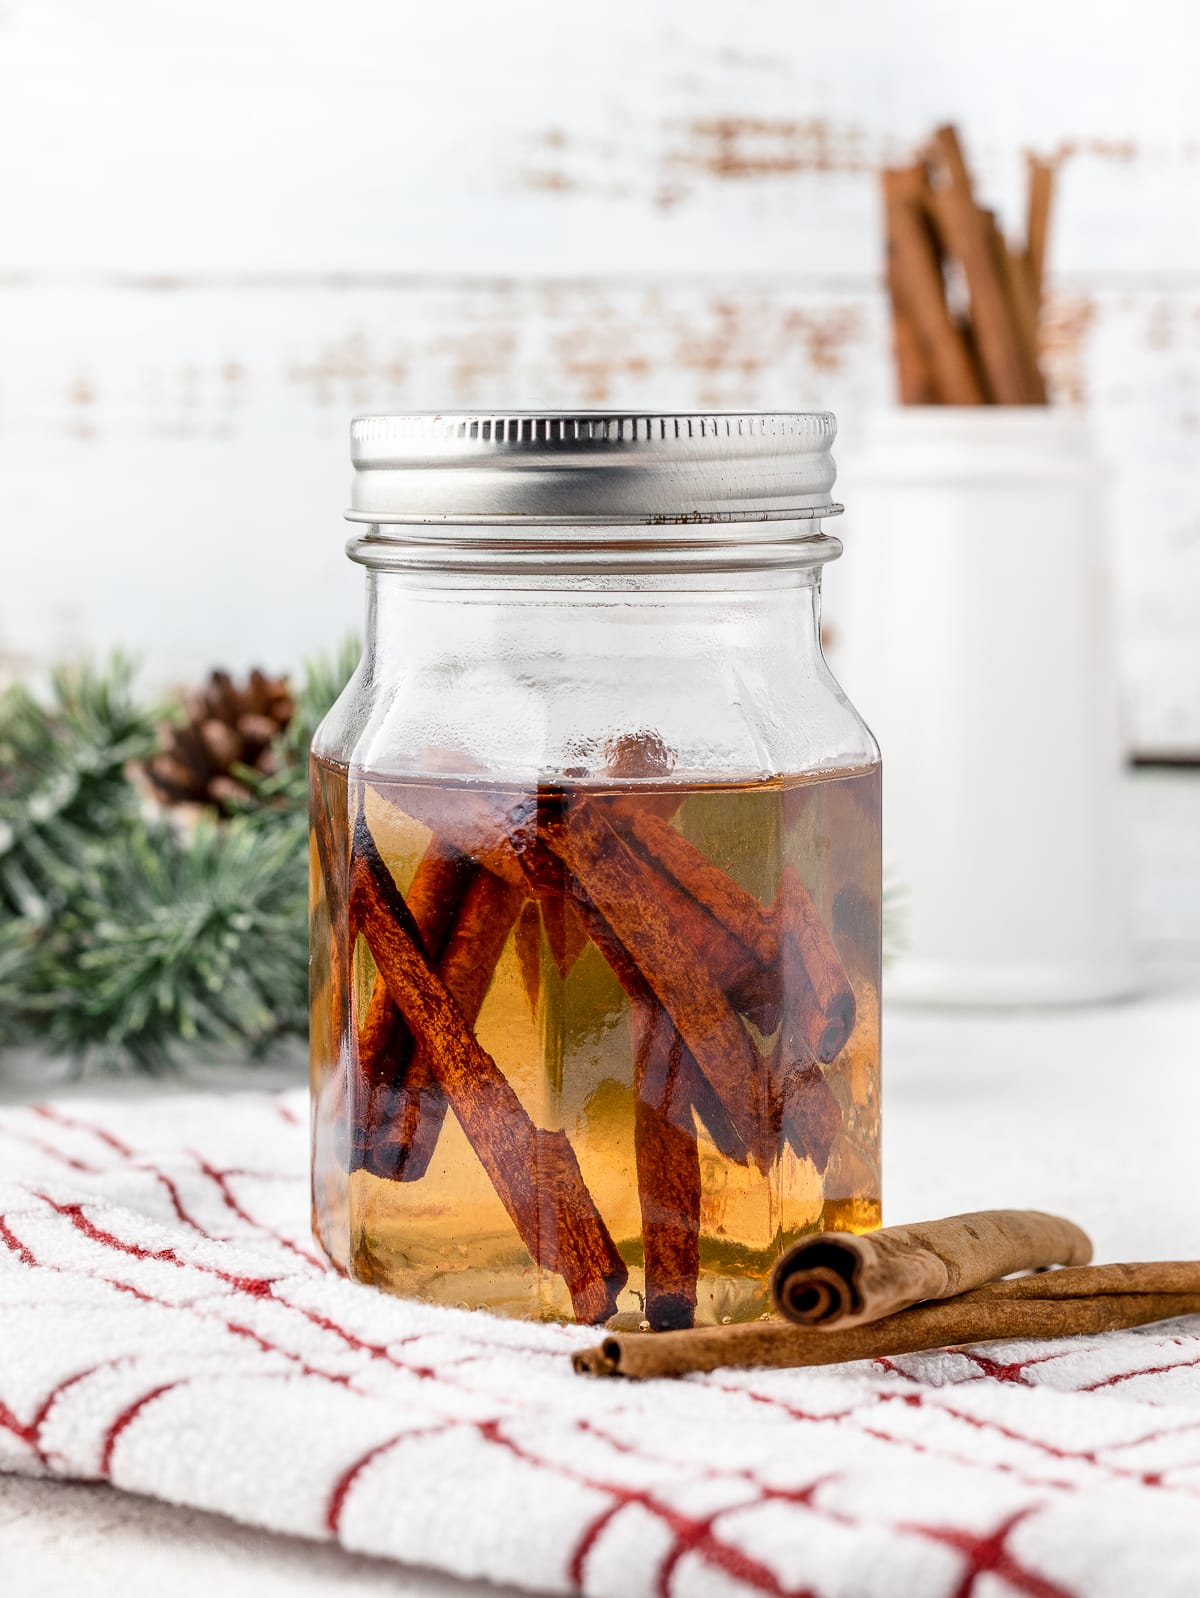 Cinnamon Syrup stored in a glass lidded jar, surrounded by extra cinnamon sticks.